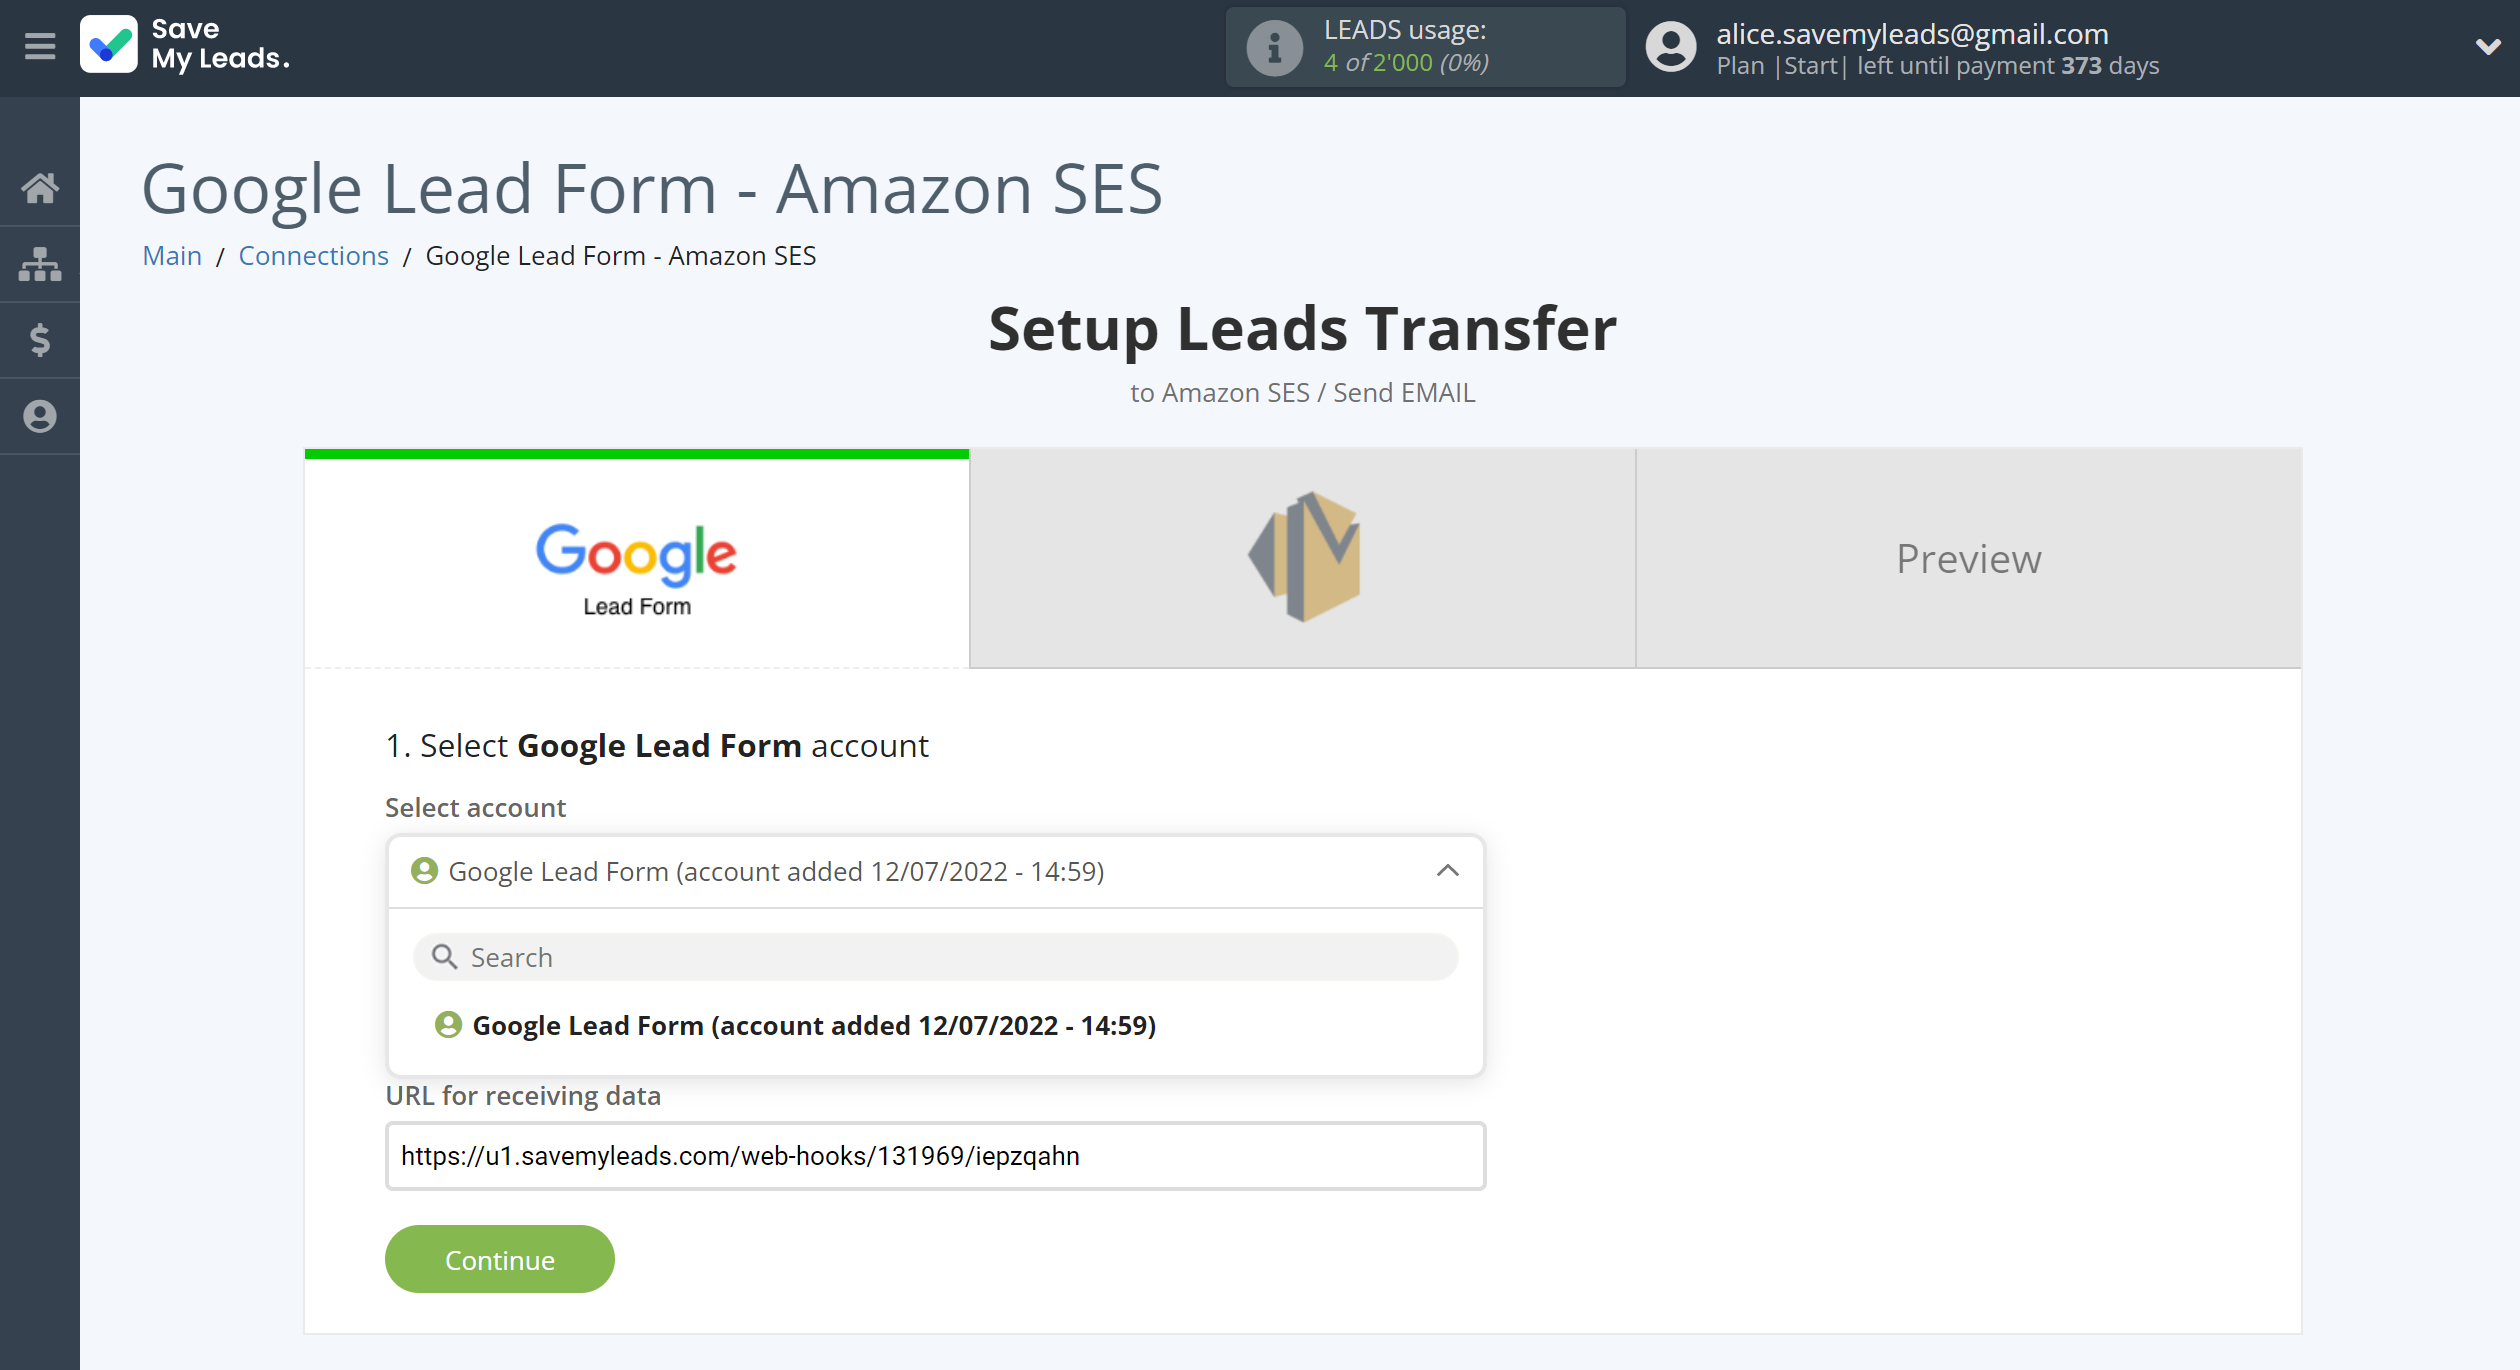 How to Connect Google Lead Form with Amazon SES | Data Source account selection